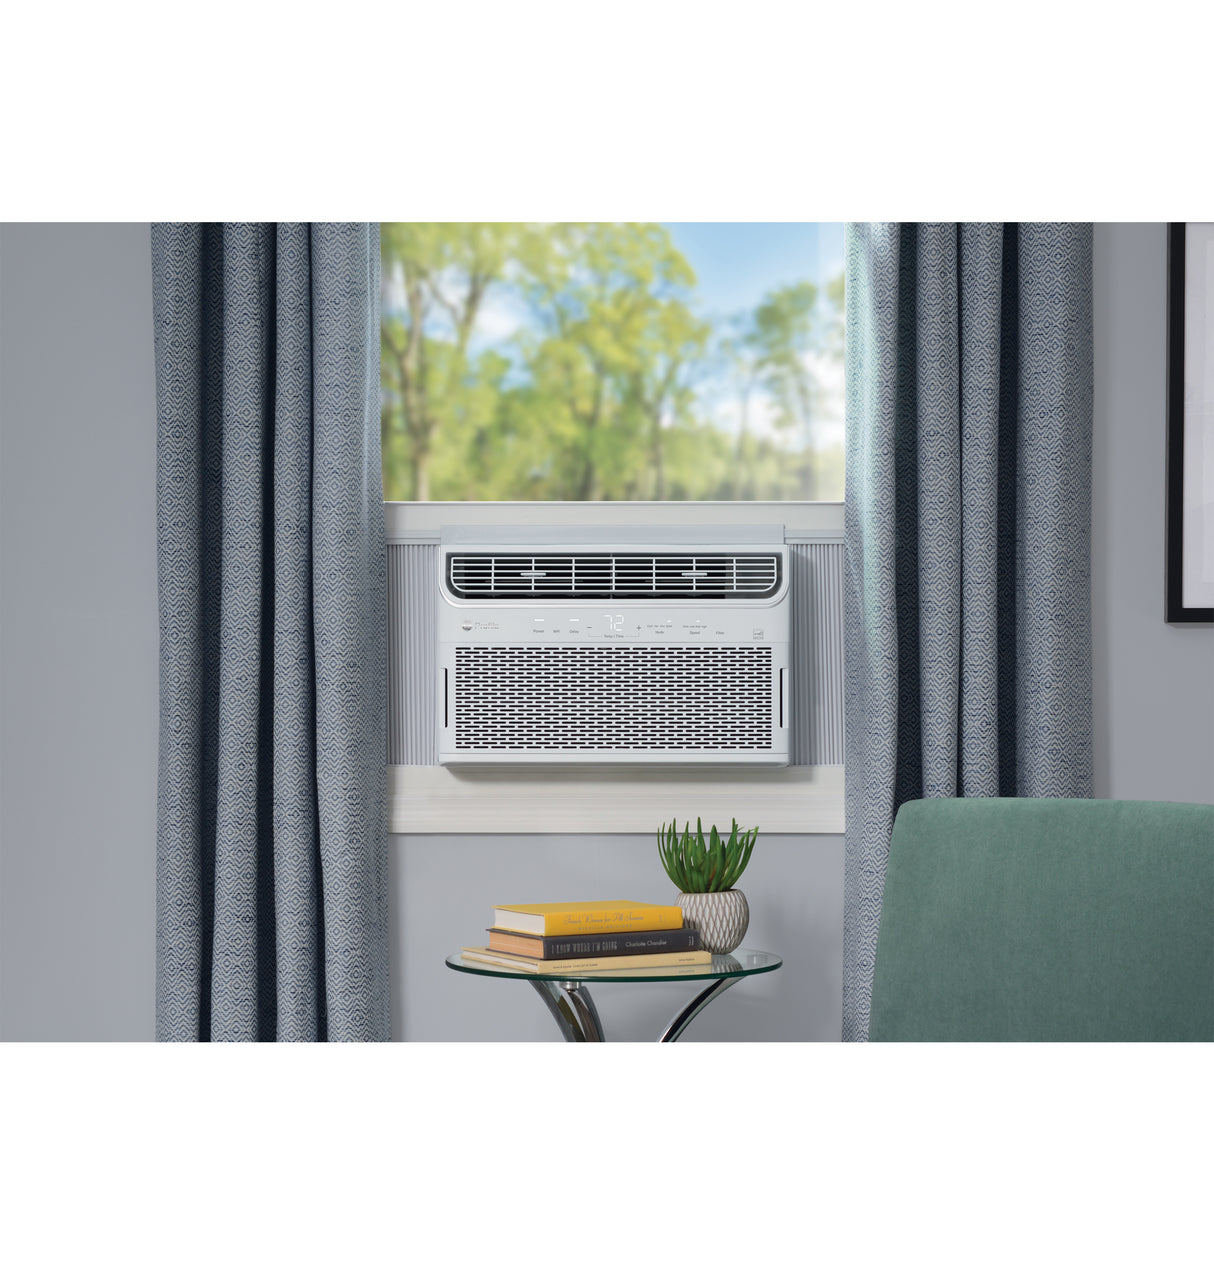 GE Profile(TM) ENERGY STAR(R) 12,000 BTU Inverter Smart Ultra Quiet Window Air Conditioner for Large Rooms up to 550 sq. ft. - (AHTR12AC)